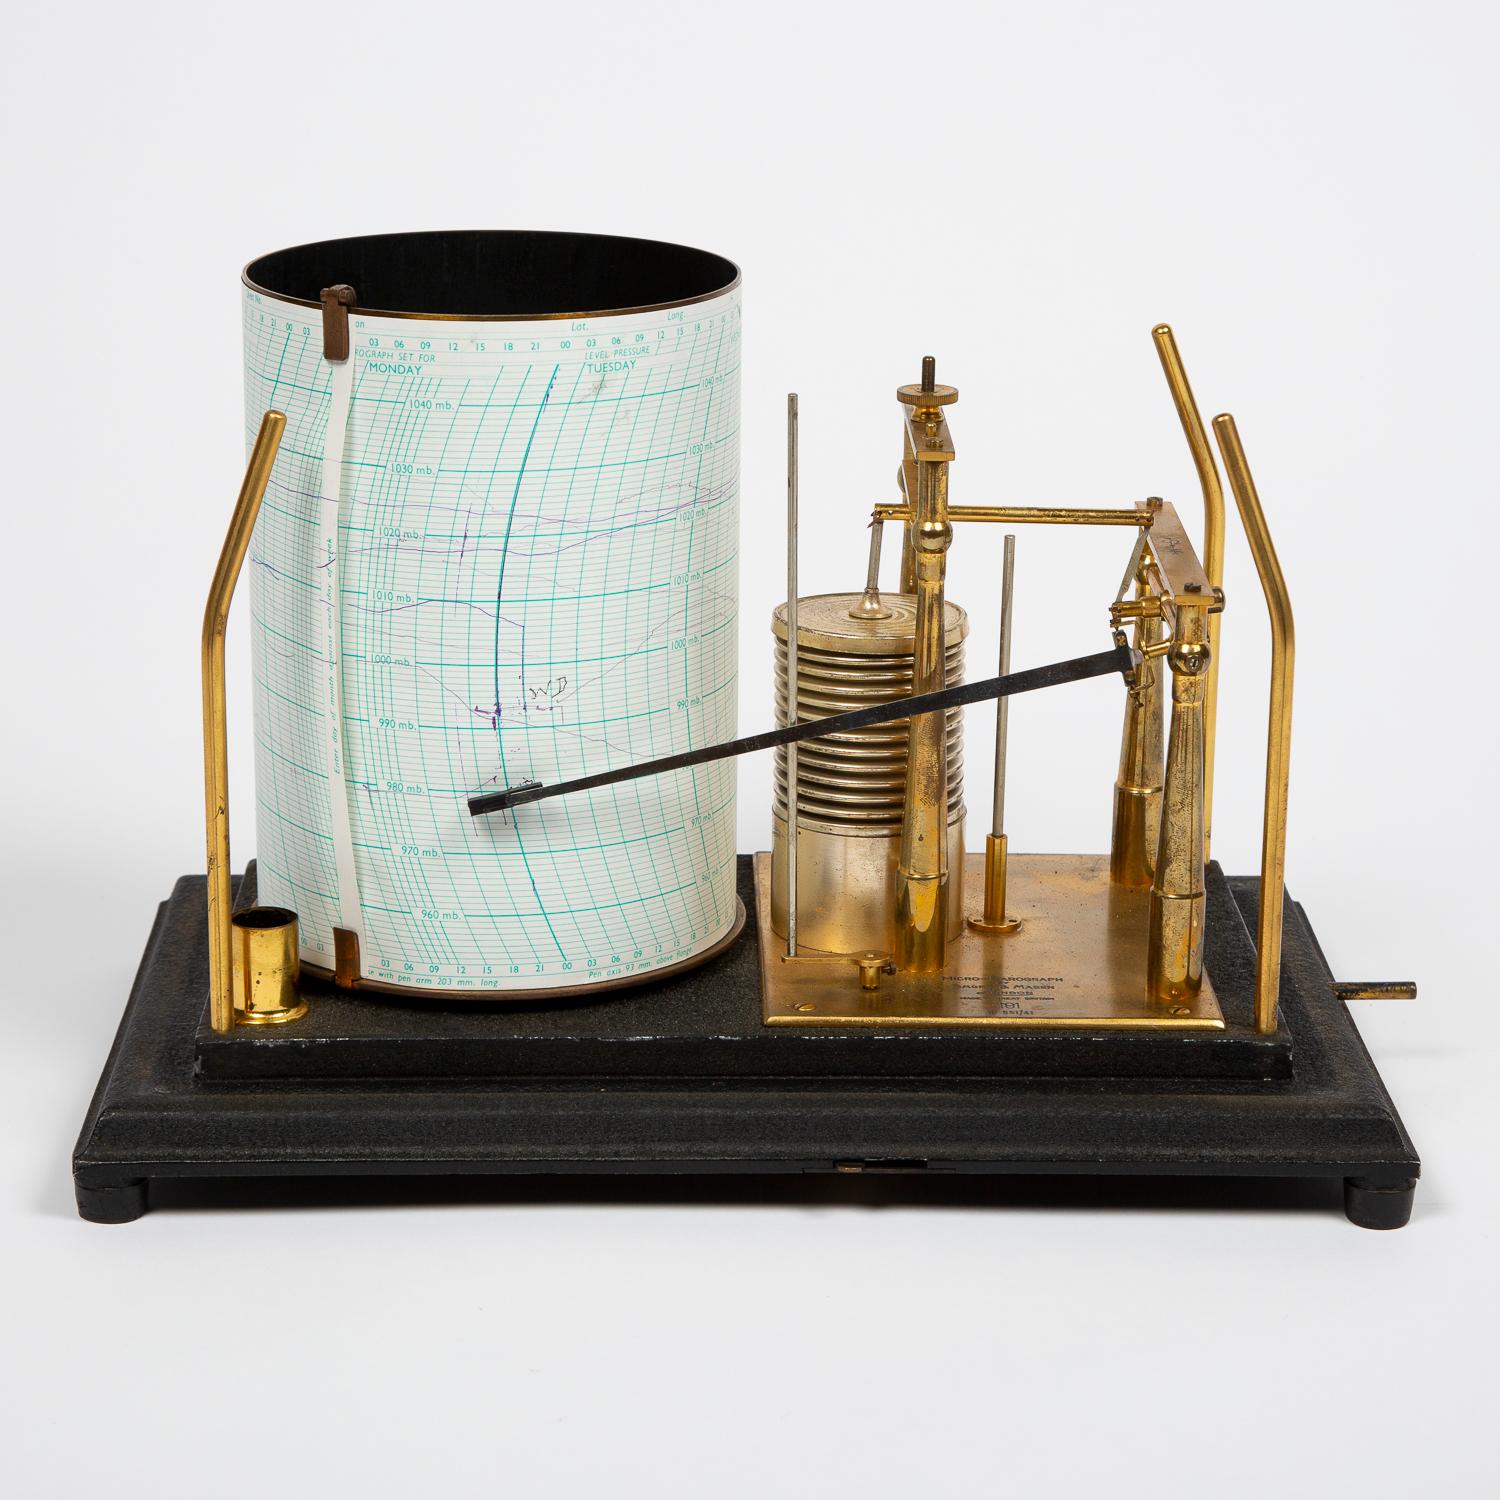 An open scale Micro-barograph by Short & Mason of London in enameled glass case.

Number: 551/41

Seven day clockwork drive by Horstmann Gear Co Ltd, of Bath. Serial number: 7027/59

With Meteorological Office “MO” logo.

Meteorological